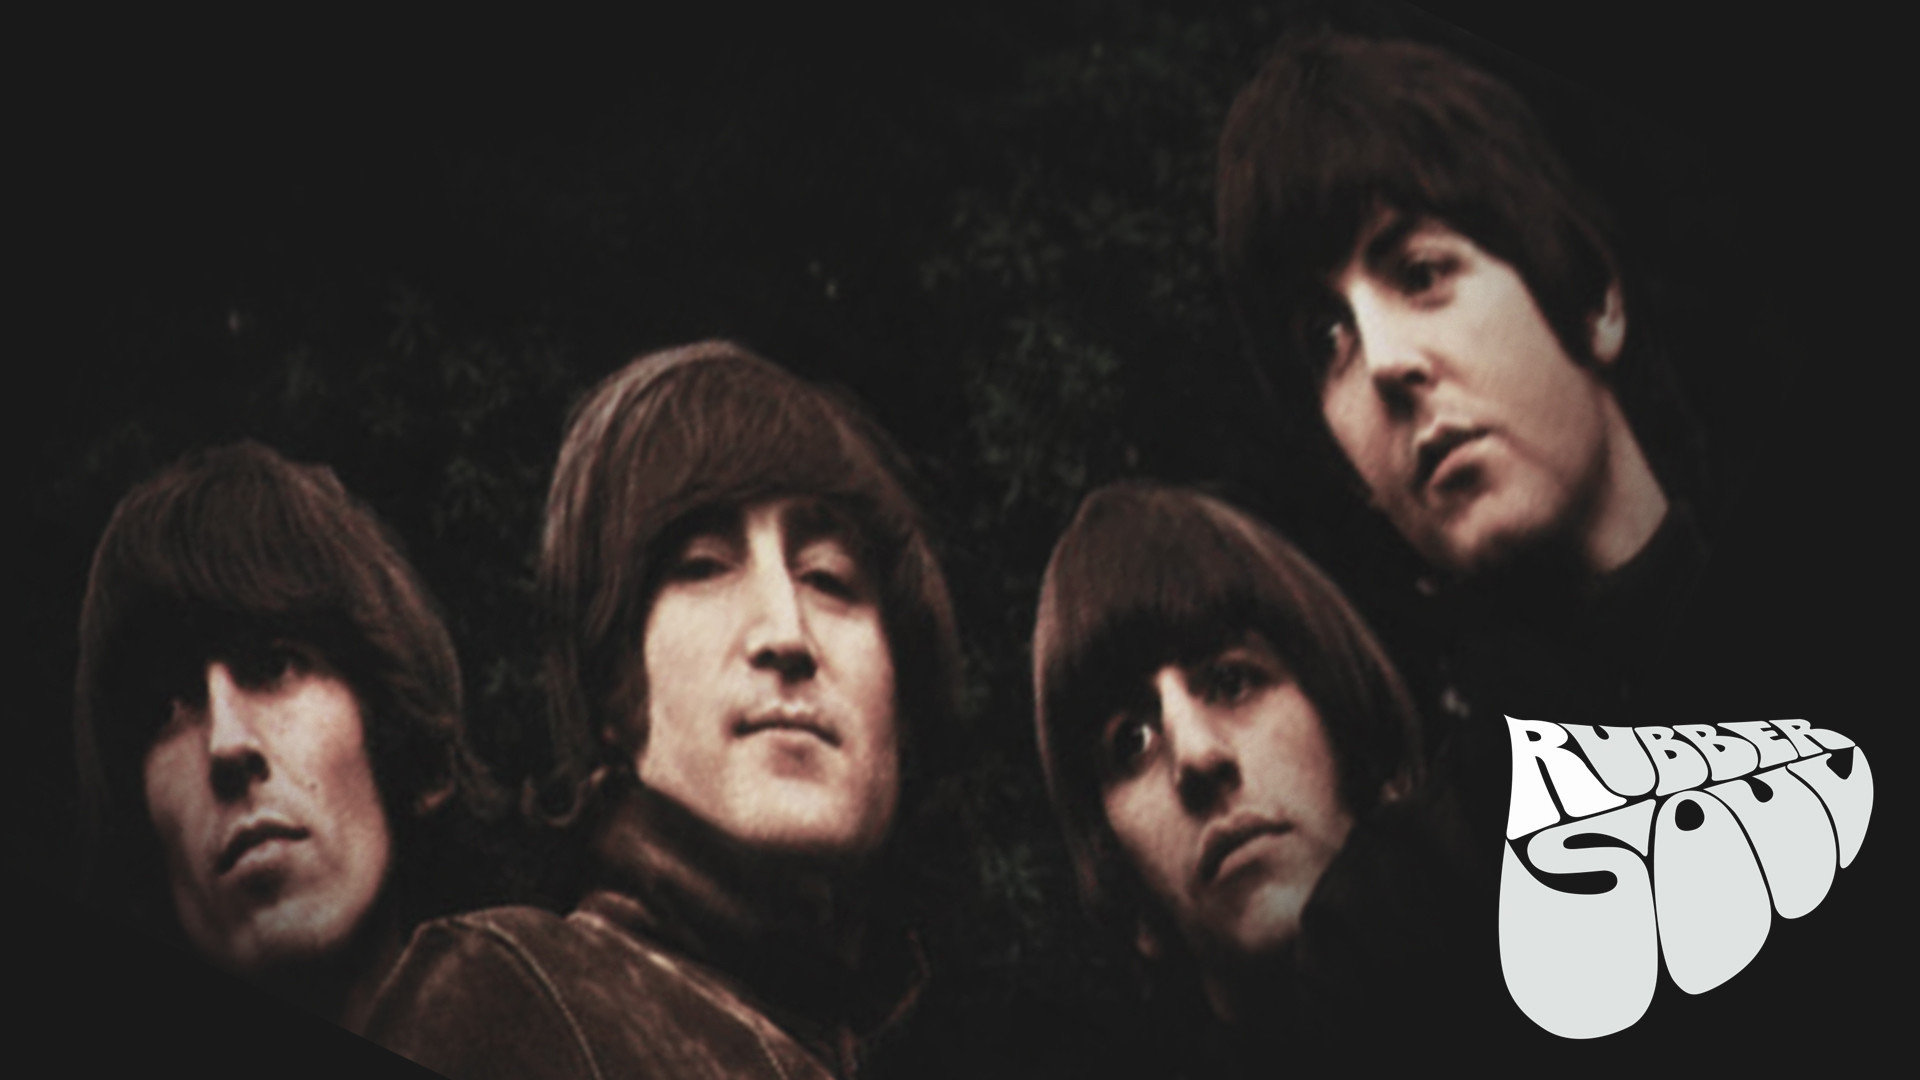 Download 1080p The Beatles desktop background ID:271343 for free